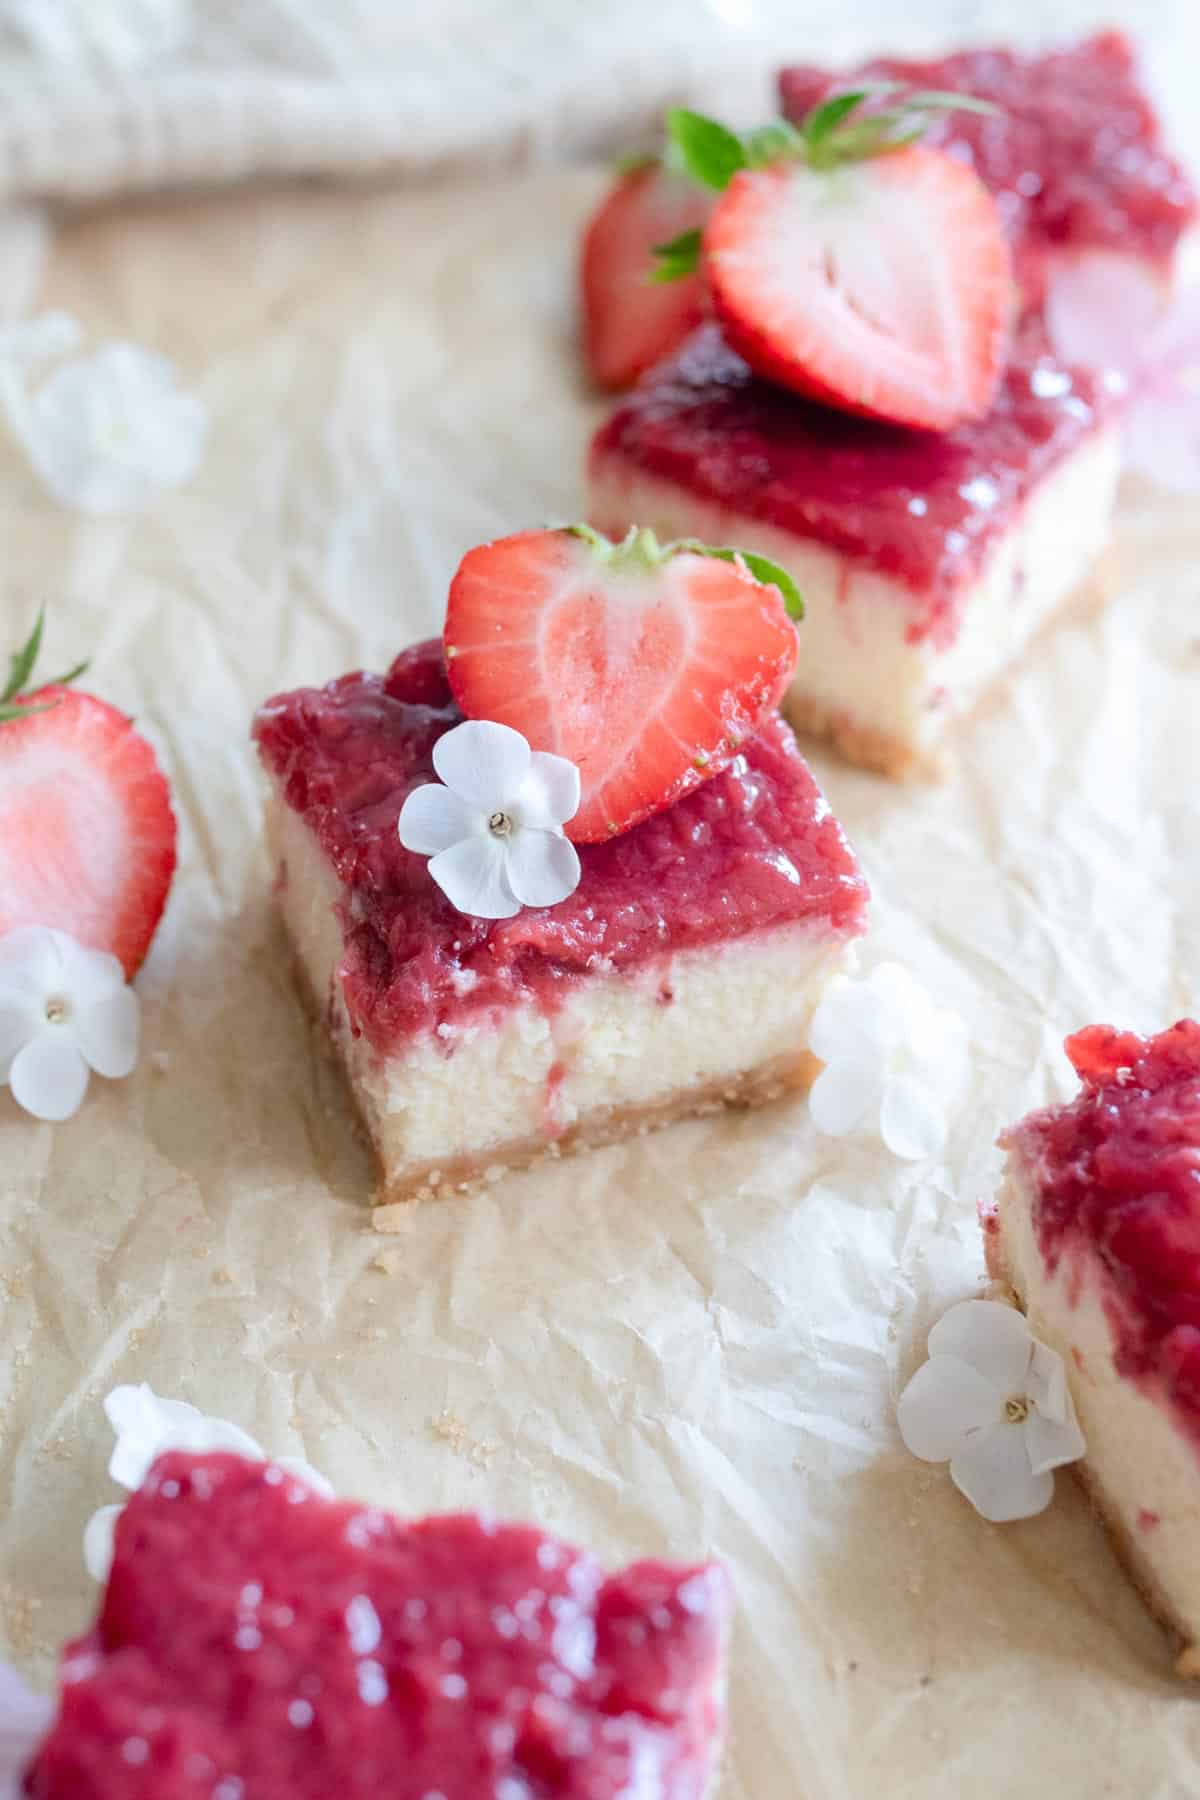 Cut cheesecake bars topped with fresh strawberries and small white flours on brown parchment paper.